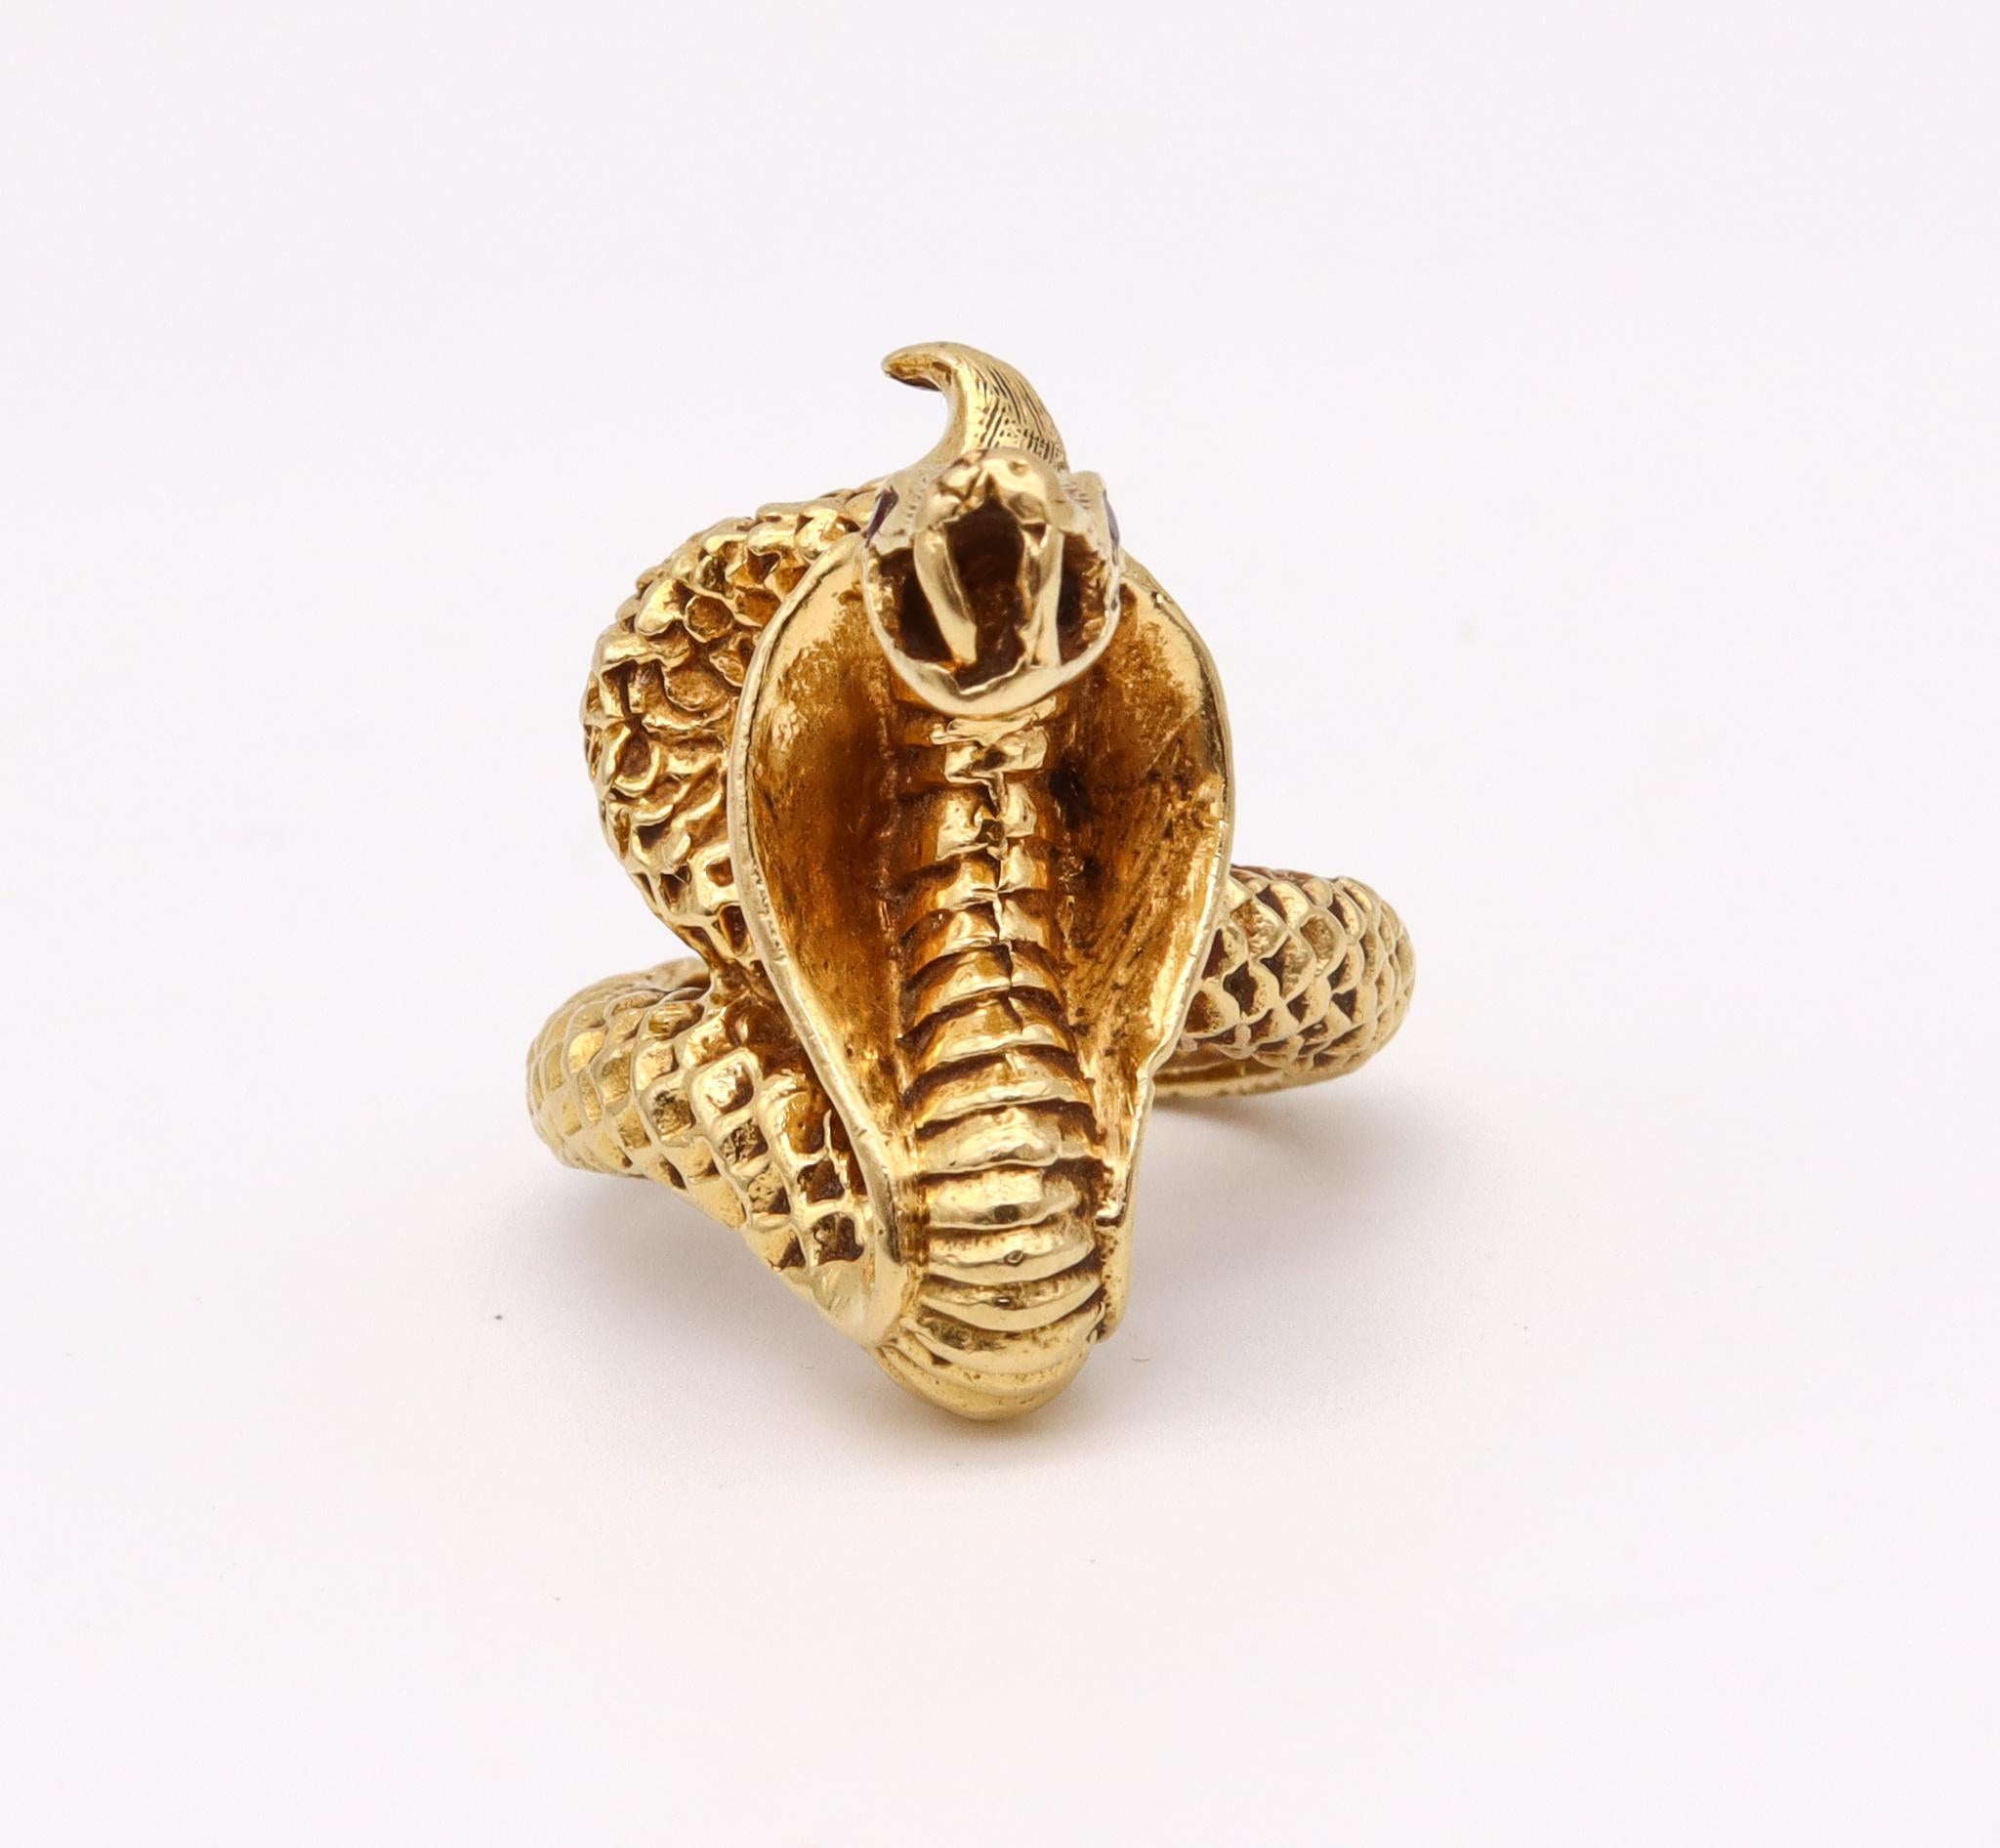 Art deco egyptian revival cobra ring.

Beautiful three dimensional ring, created during the art deco period with Egyptian revival patterns circa 1930's. This unusual cocktail ring has been sculpted in the form of a cobra in solid 18k yellow gold